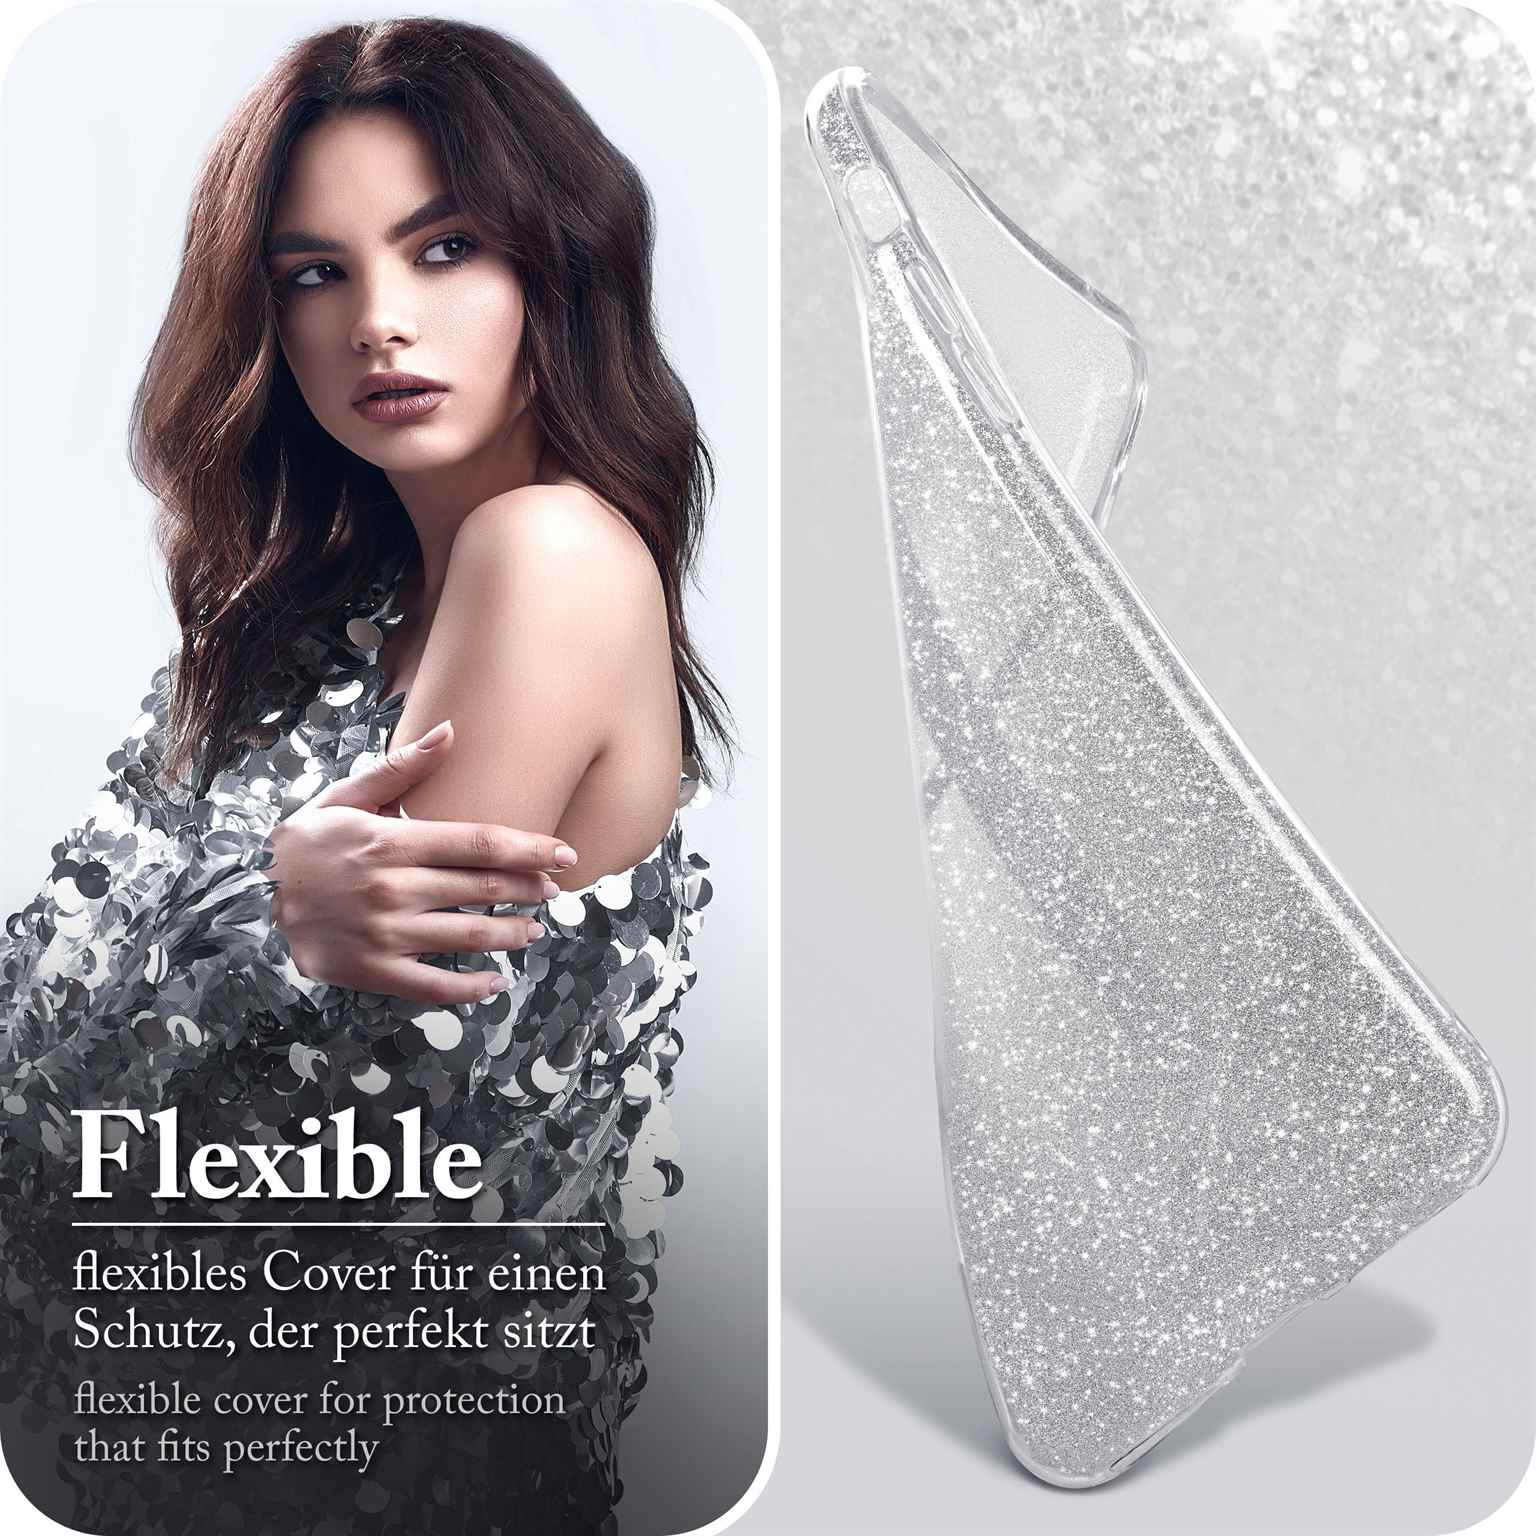 Sparkle - Silver Galaxy ONEFLOW Samsung, A71, Glitter Backcover, Case,